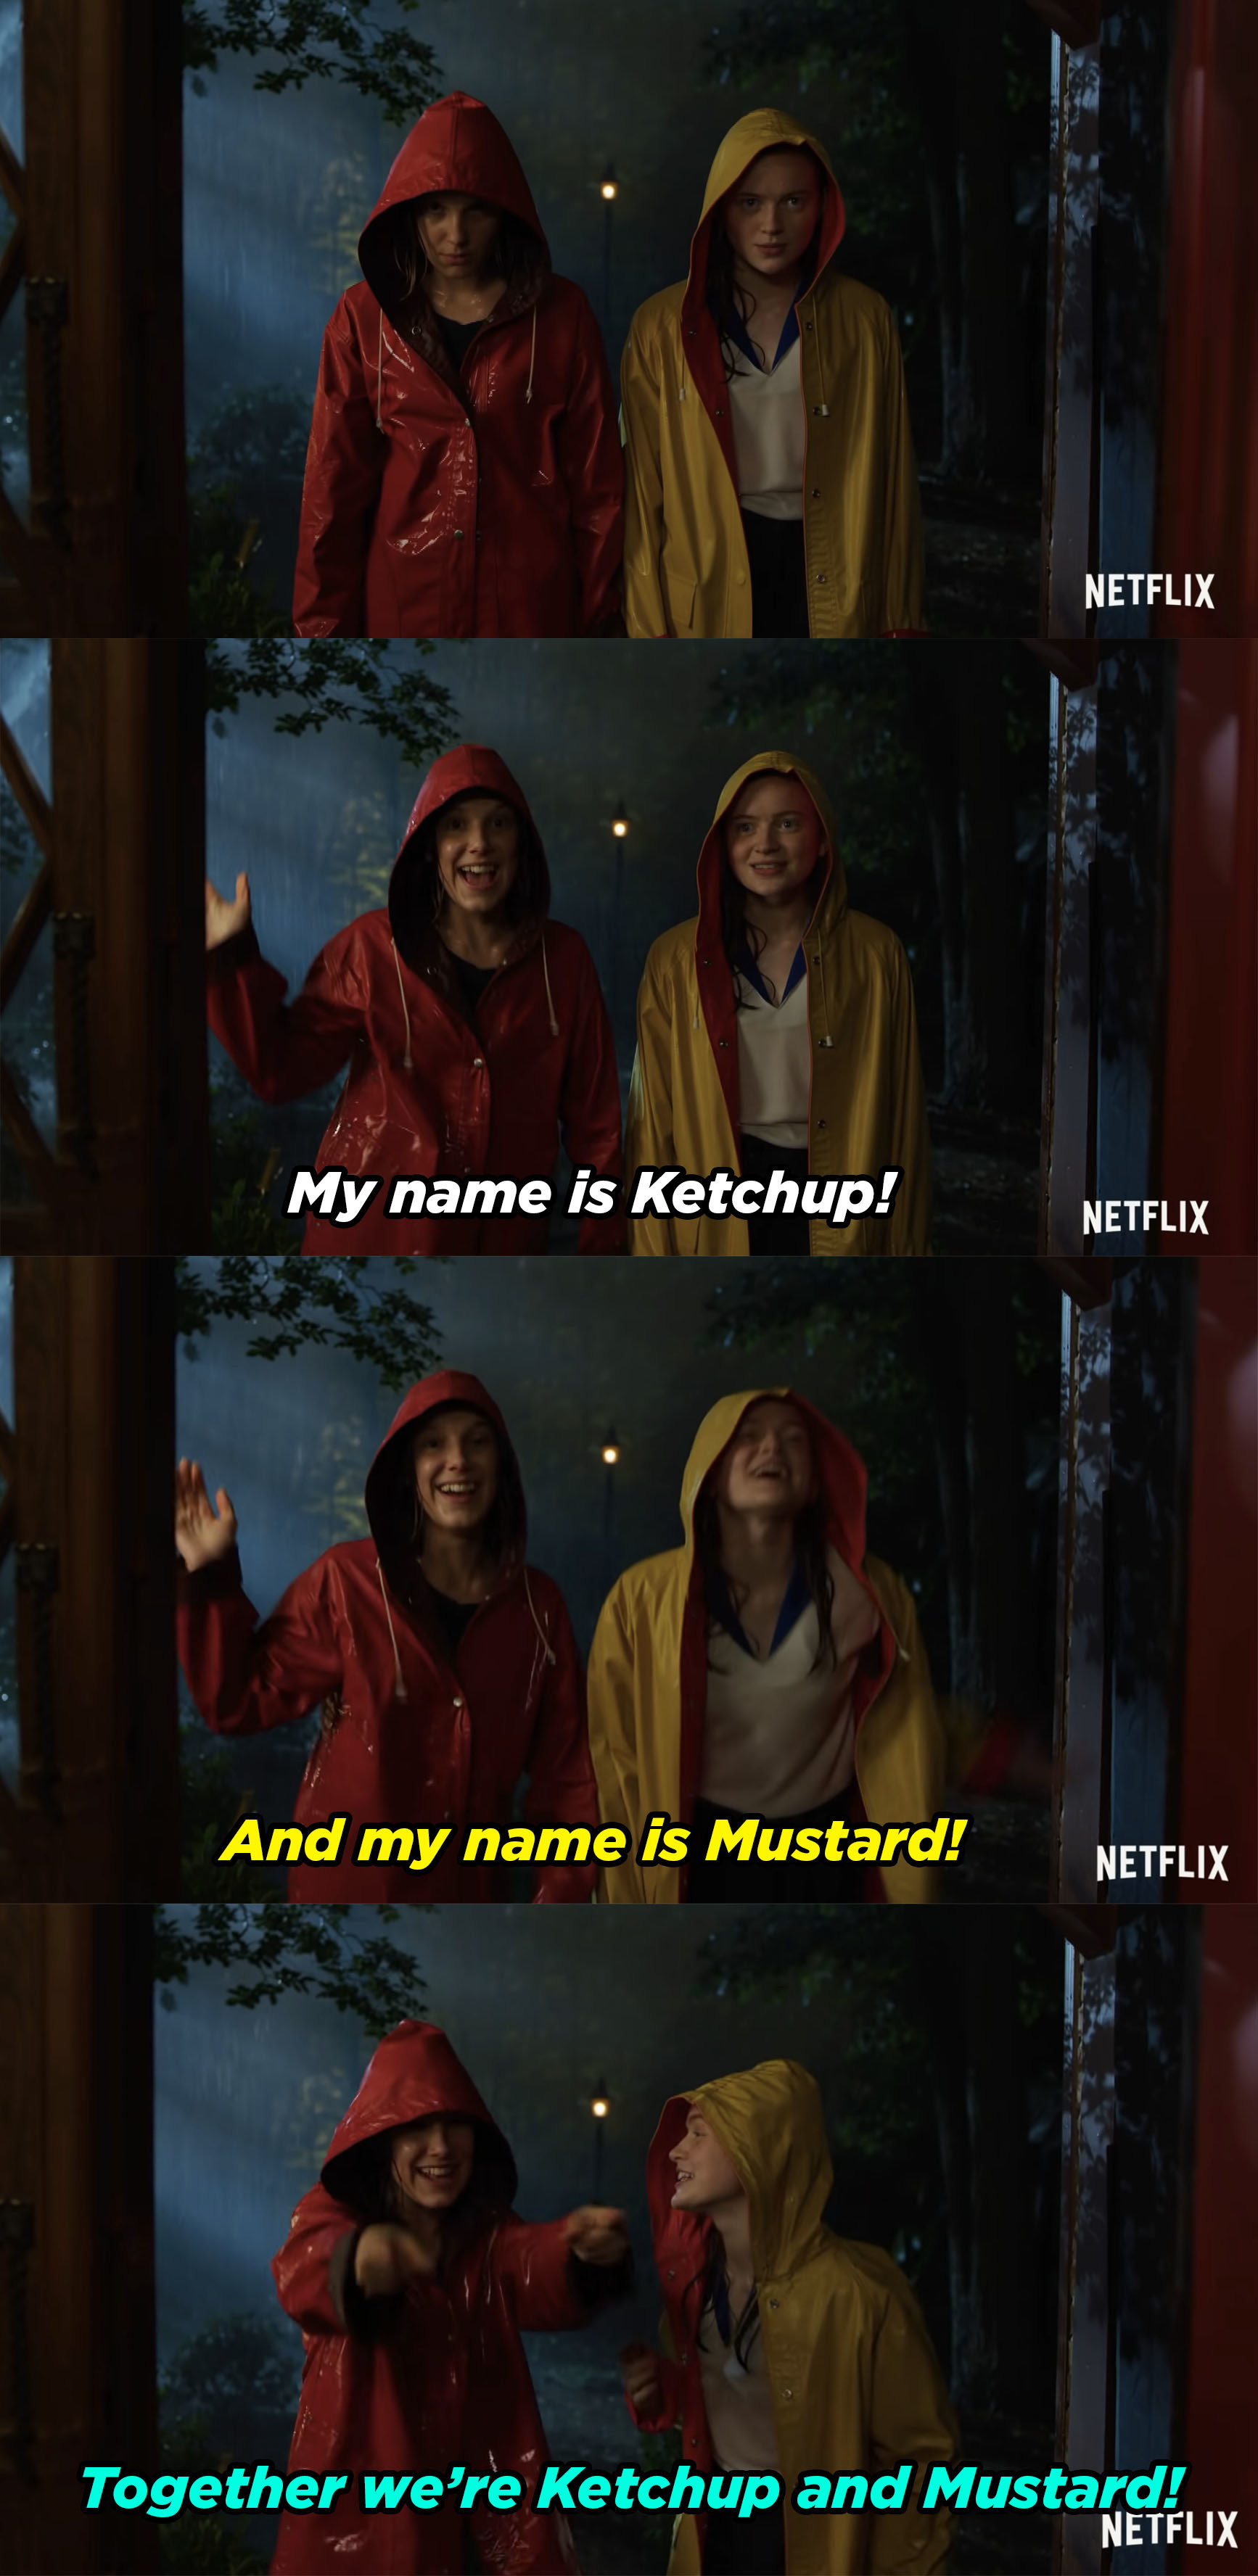 the girls saying together they are ketchup and mustard